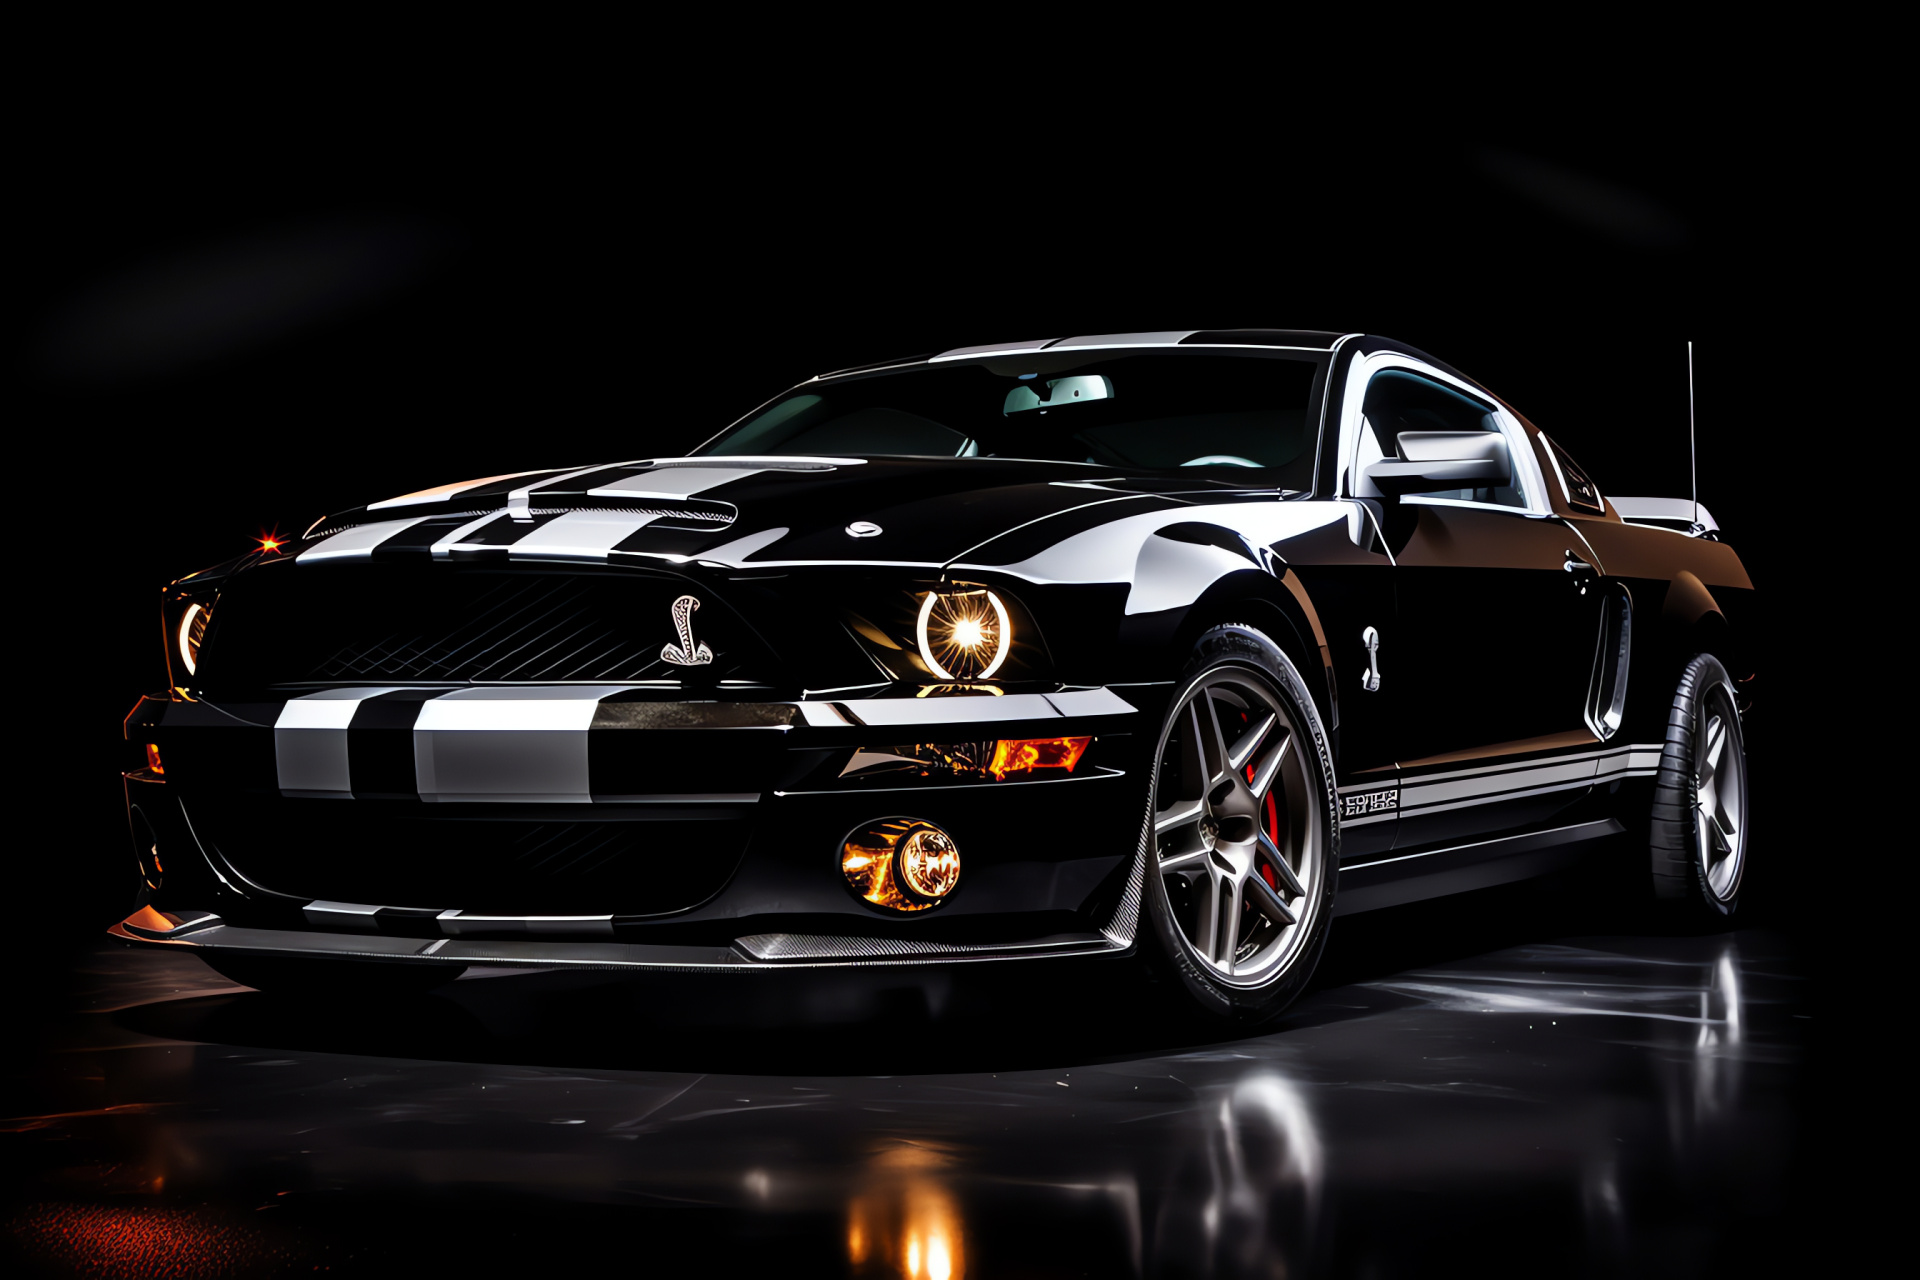 Black Mustang dominance, Intimidating Mustang angle, Ford muscle car, Assertive auto posture, High-performance craftsmanship, HD Desktop Image